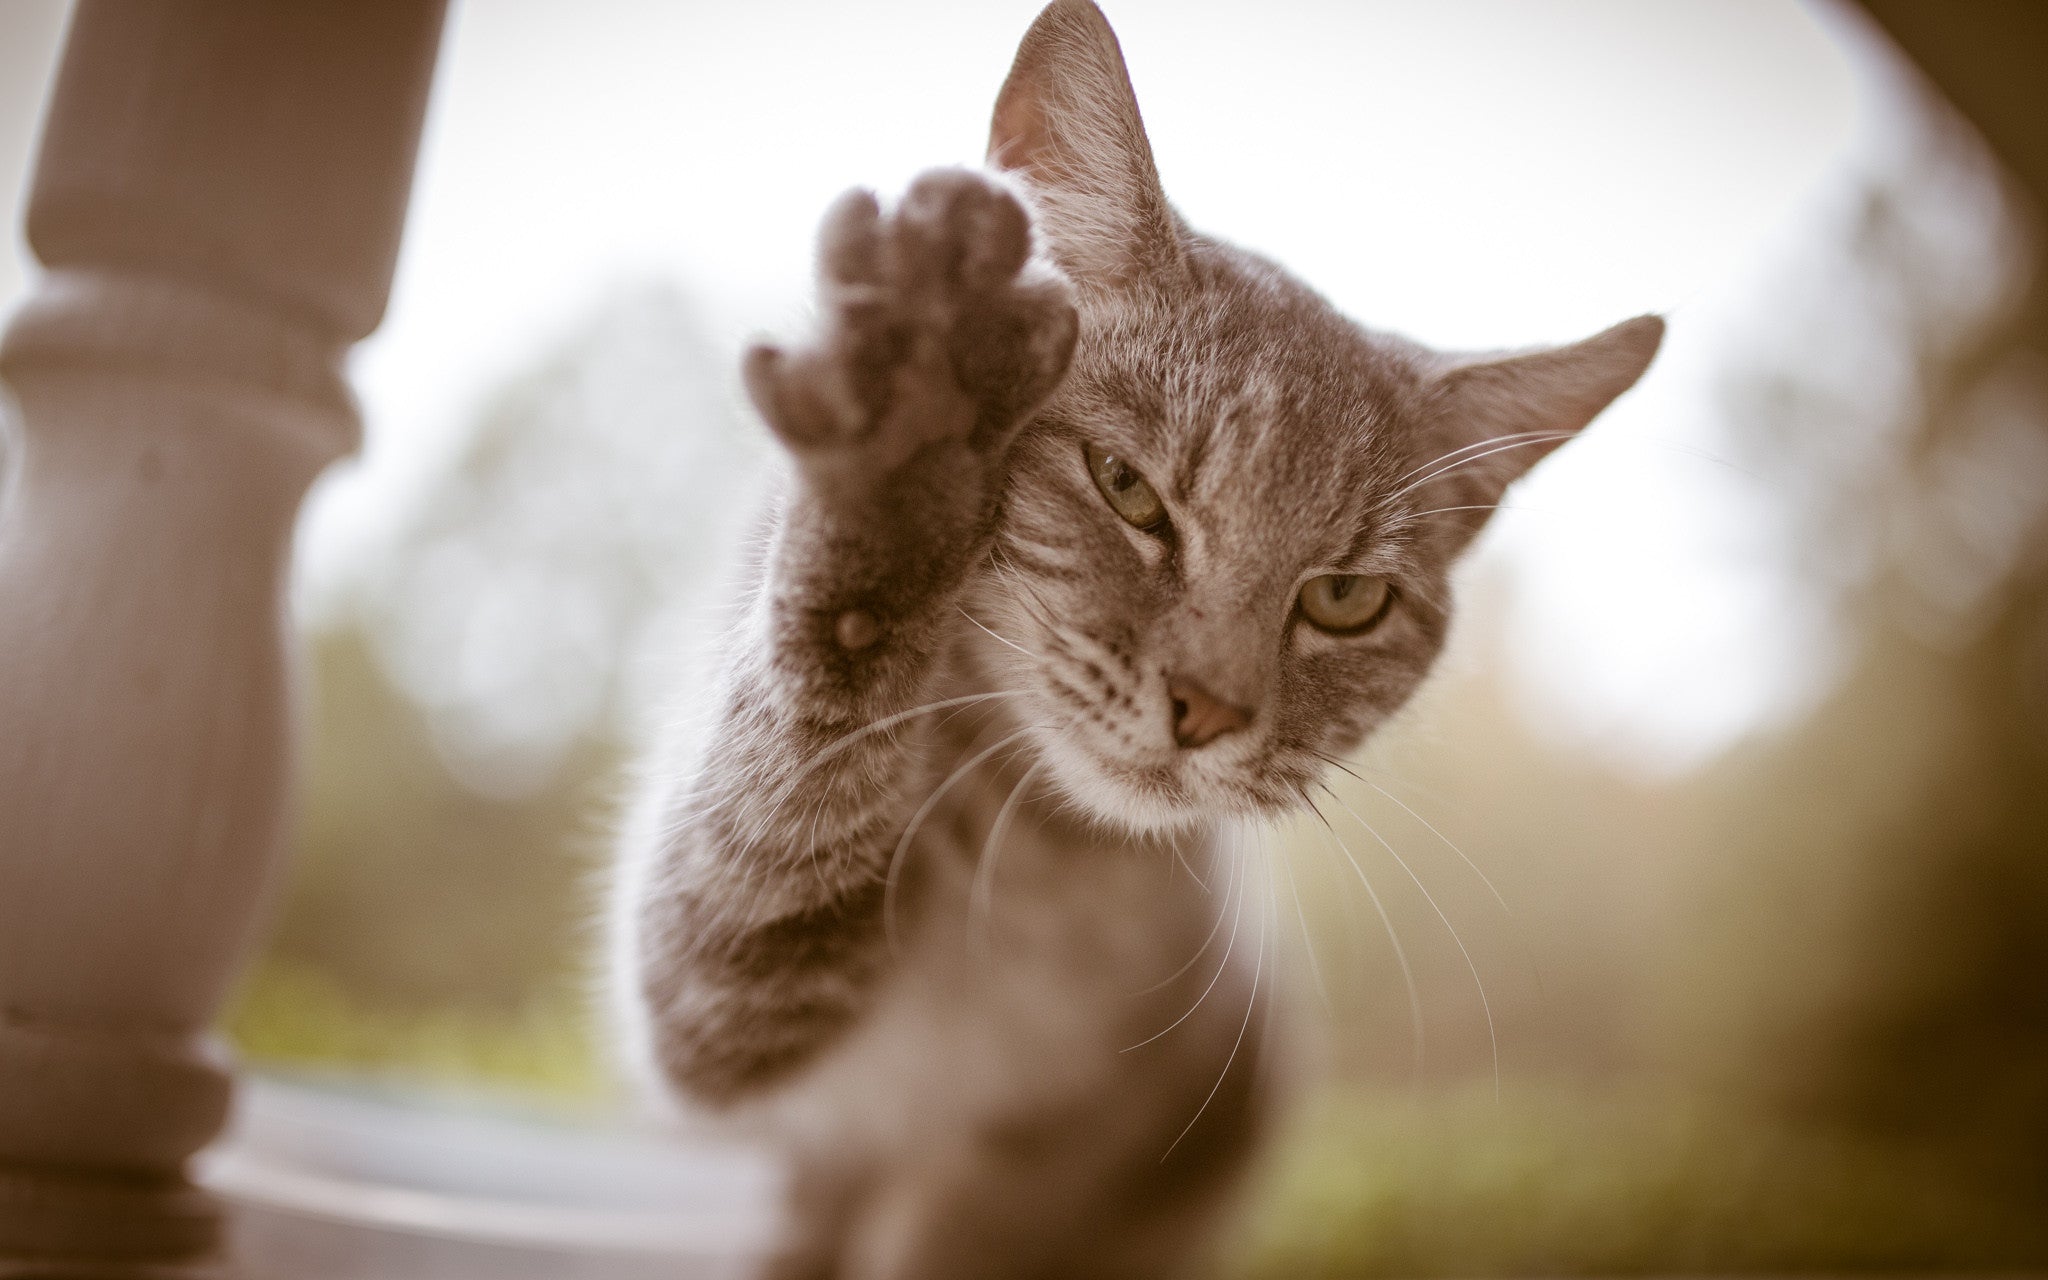 6 Fascinating Facts About Cat's Paws – Meowingtons